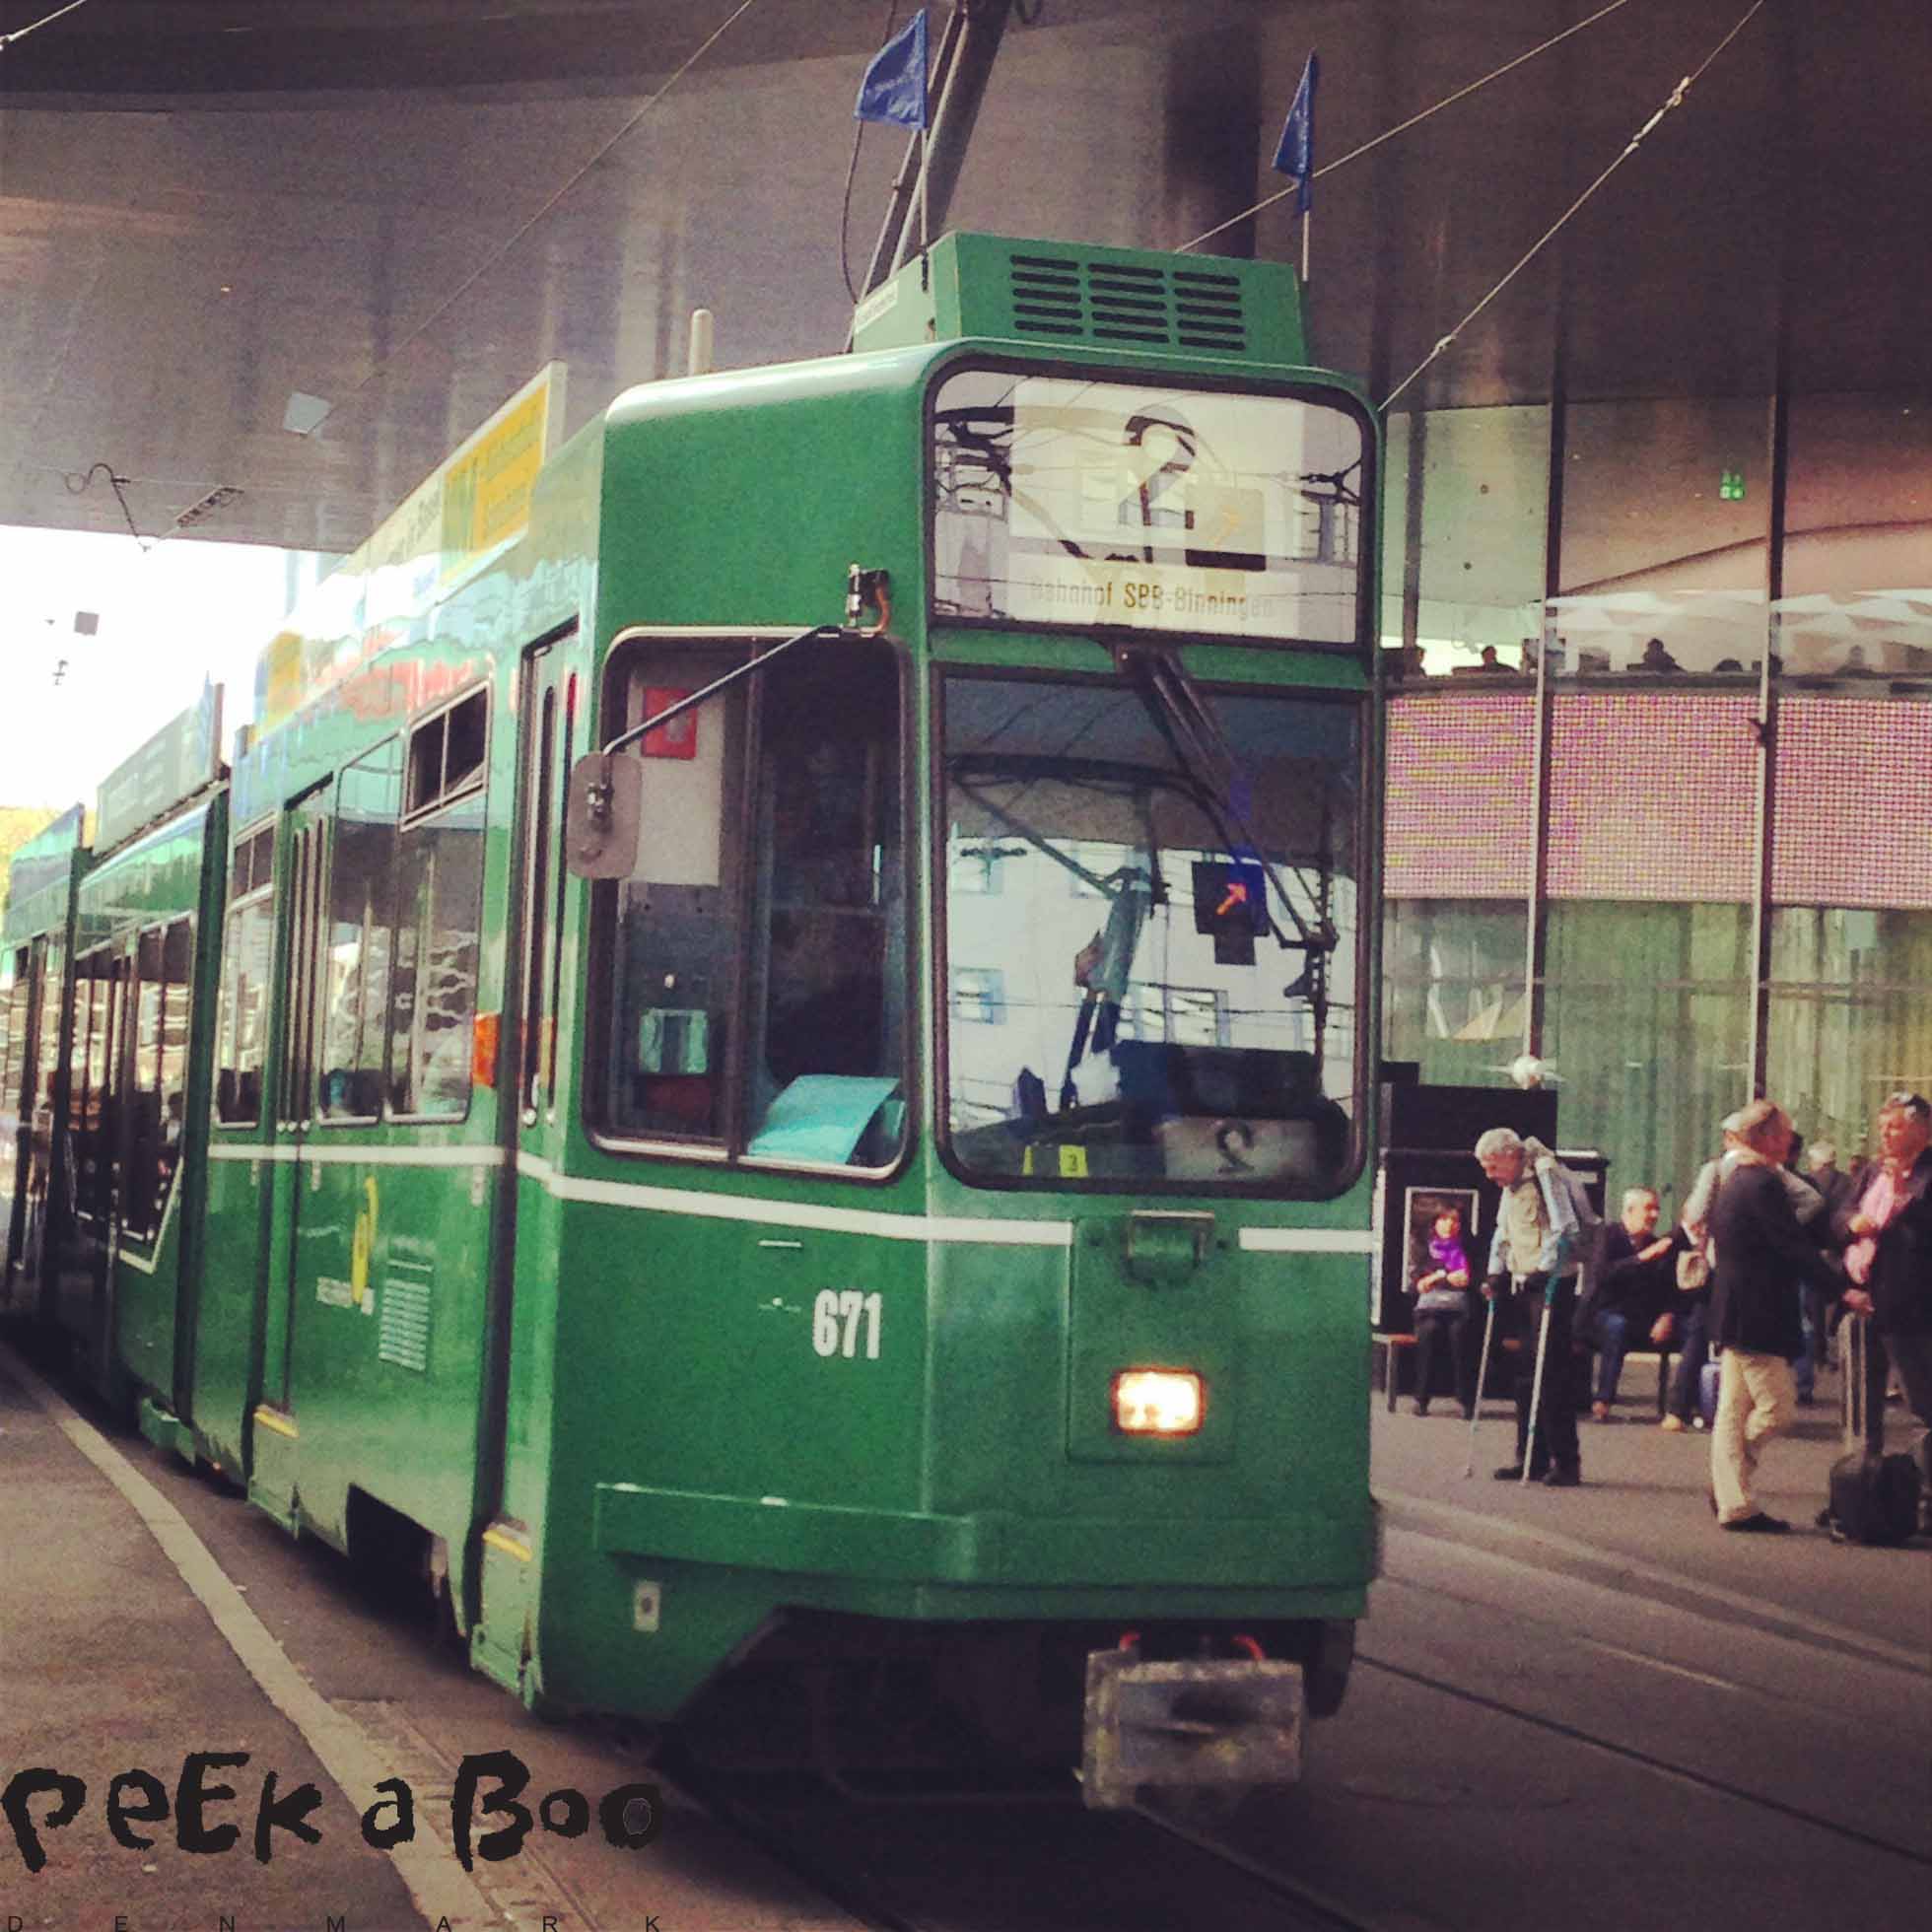 Transportation in the city of Basel is beeing done by these charming "trams"...